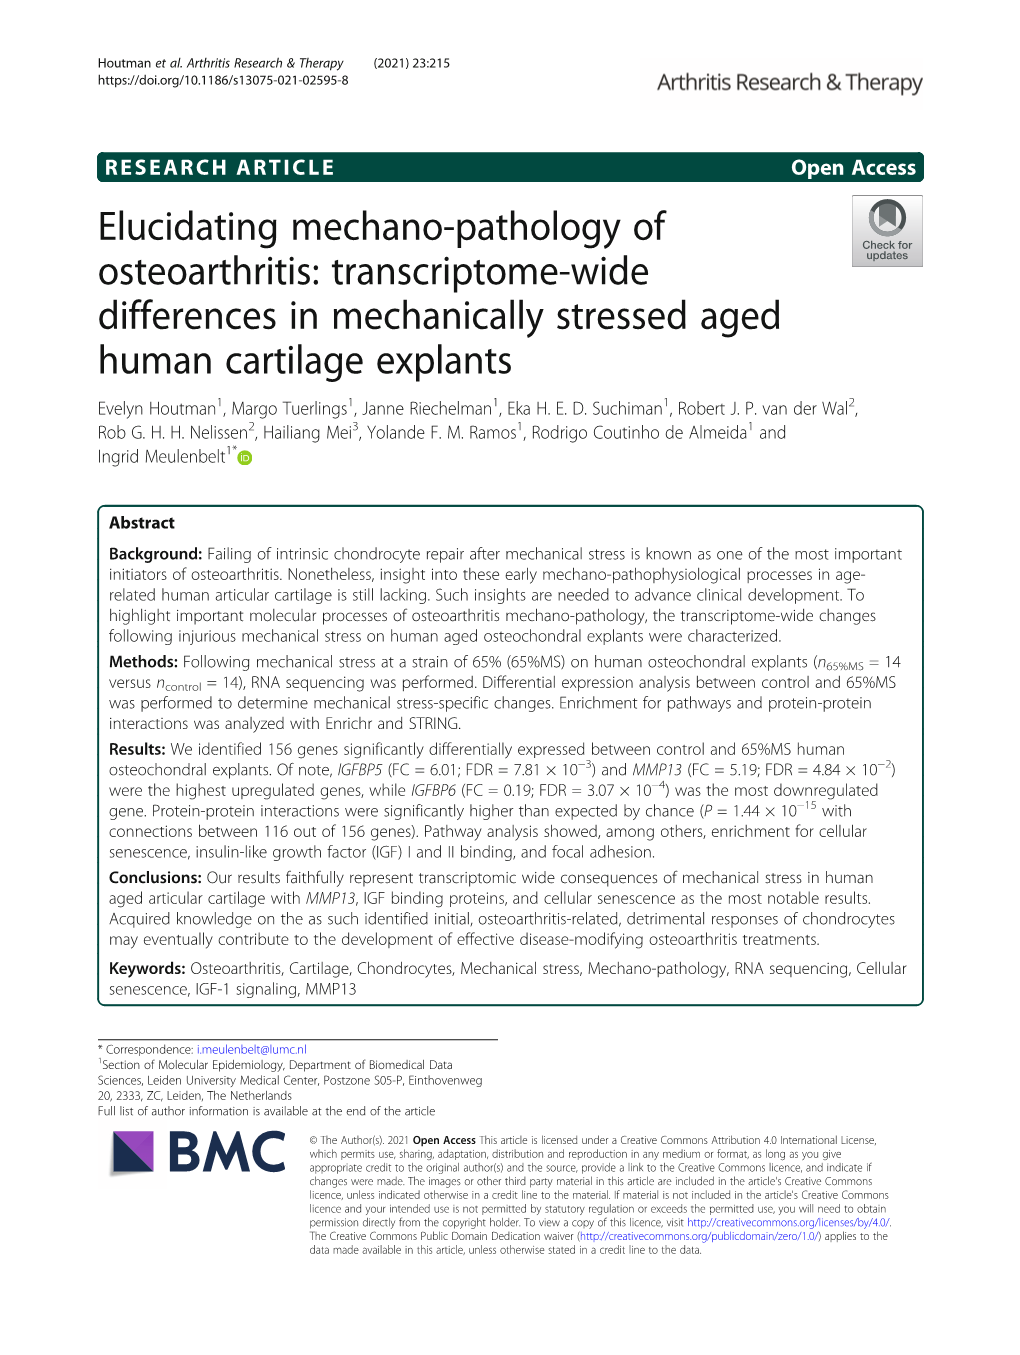 Transcriptome-Wide Differences in Mechanically Stressed Aged Human Cartilage Explants Evelyn Houtman1, Margo Tuerlings1, Janne Riechelman1, Eka H